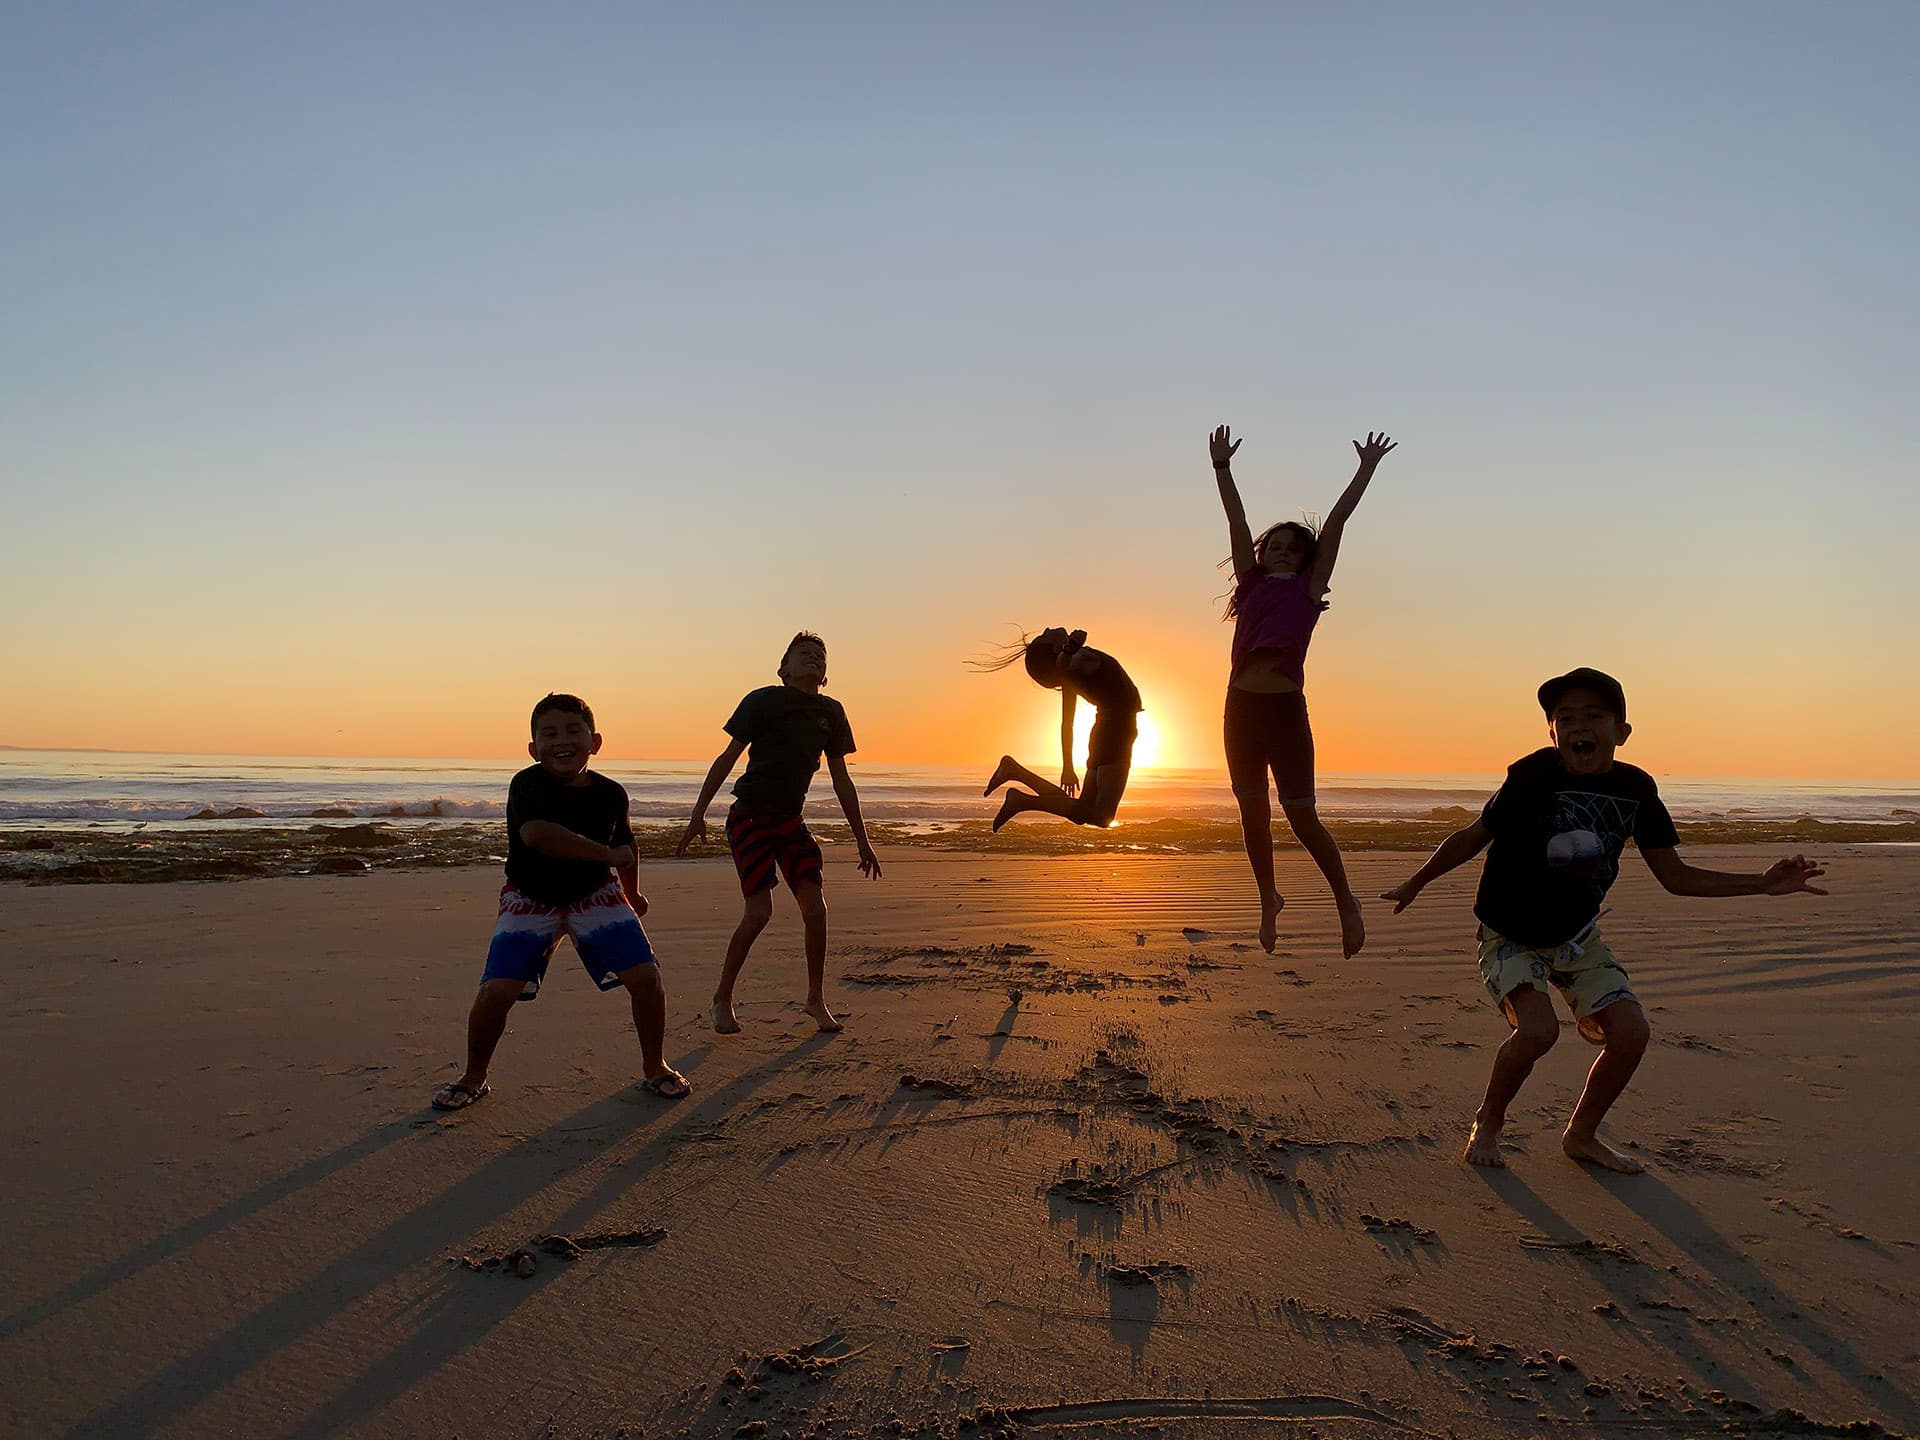 kids jump for joy on a beach with the sunset and the ocean in the background